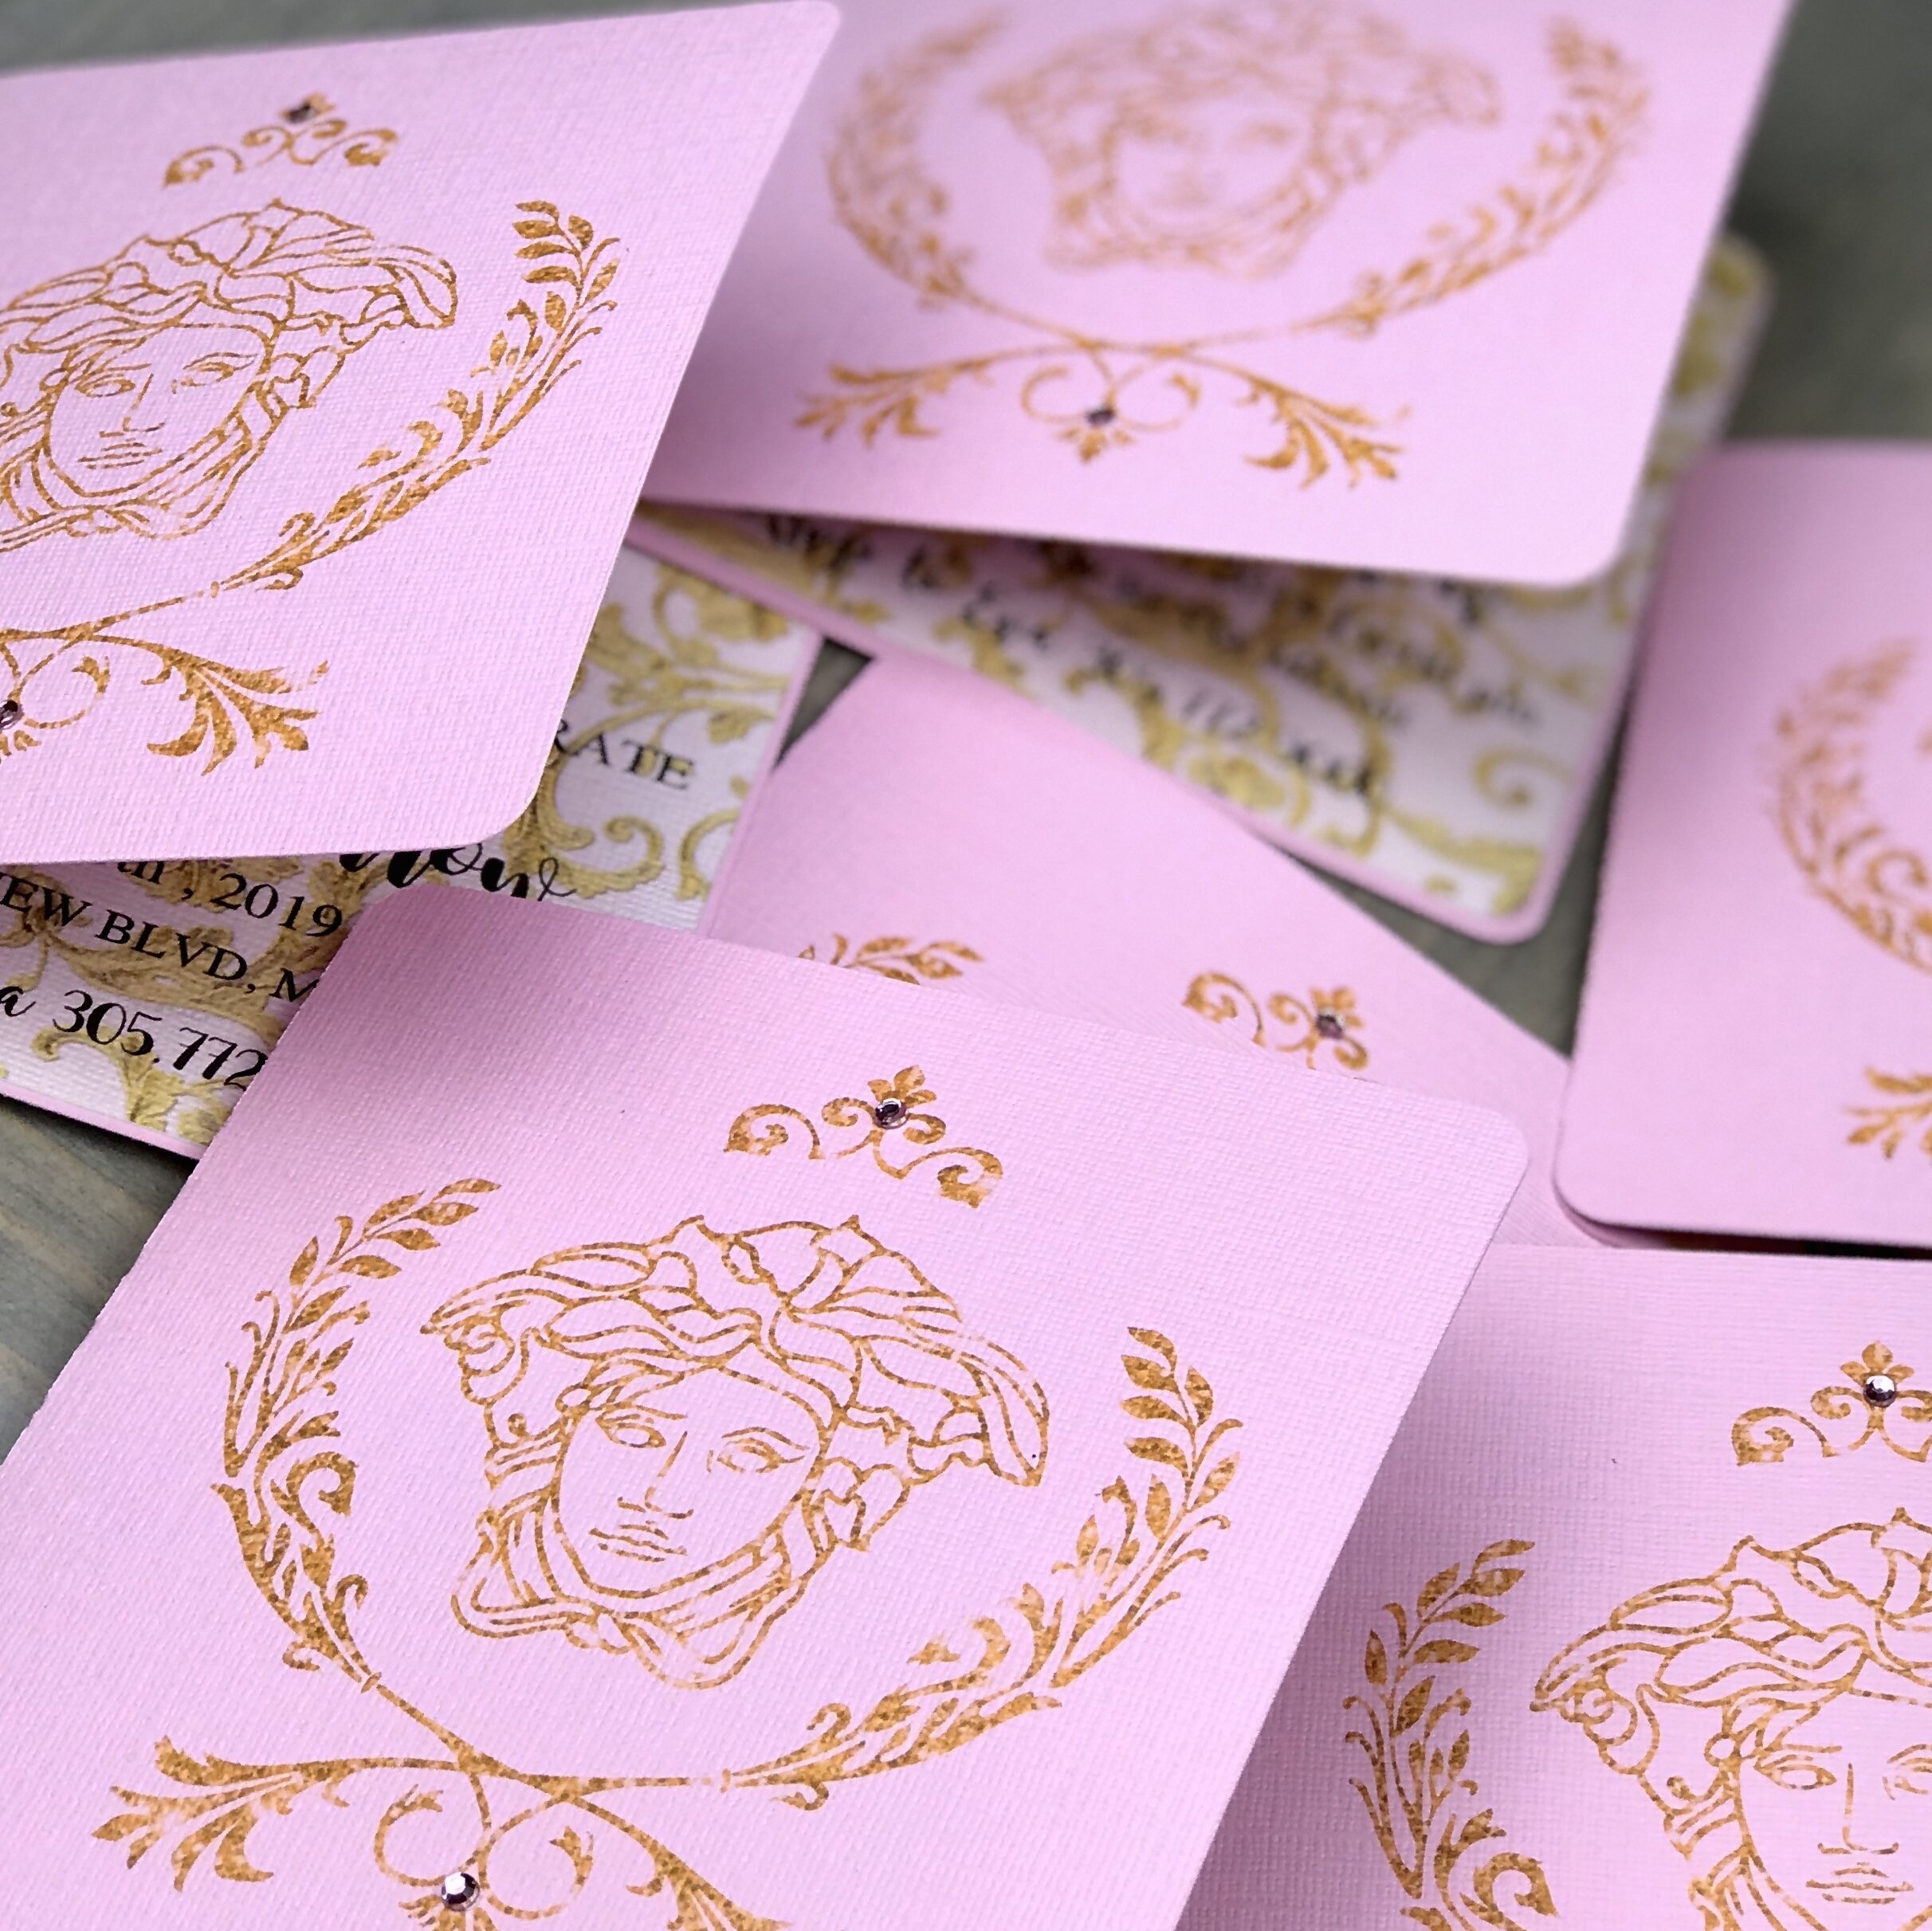 Versace Inspired Invitations — Luxury Party Items